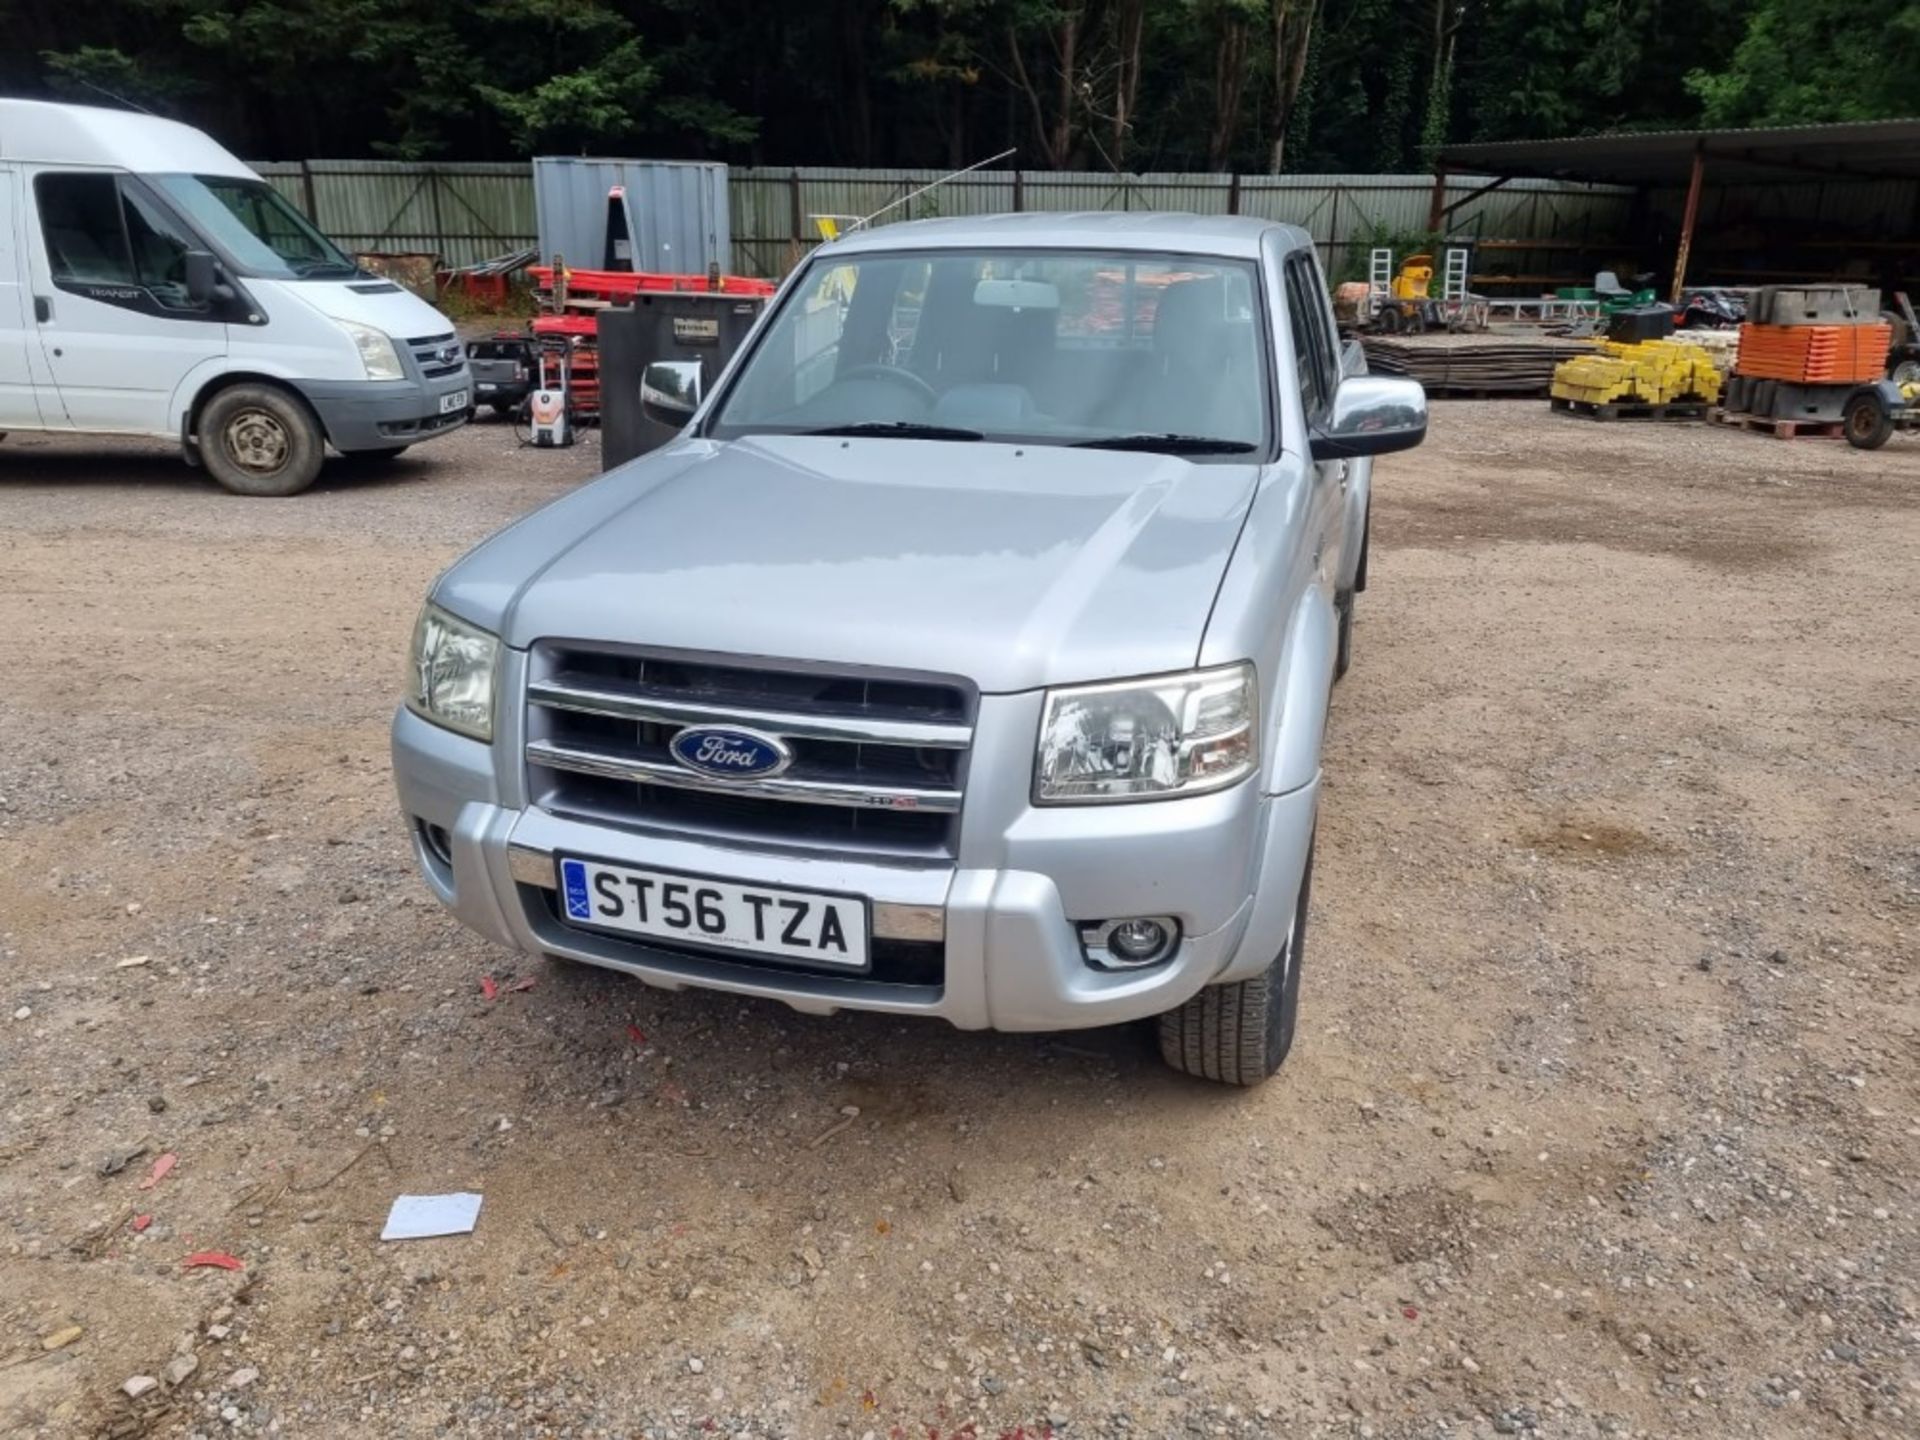 07/56 FORD RANGER THUNDER D/C 4WD - 2500cc 4dr 4x4 (Silver, 93k) - Image 3 of 9